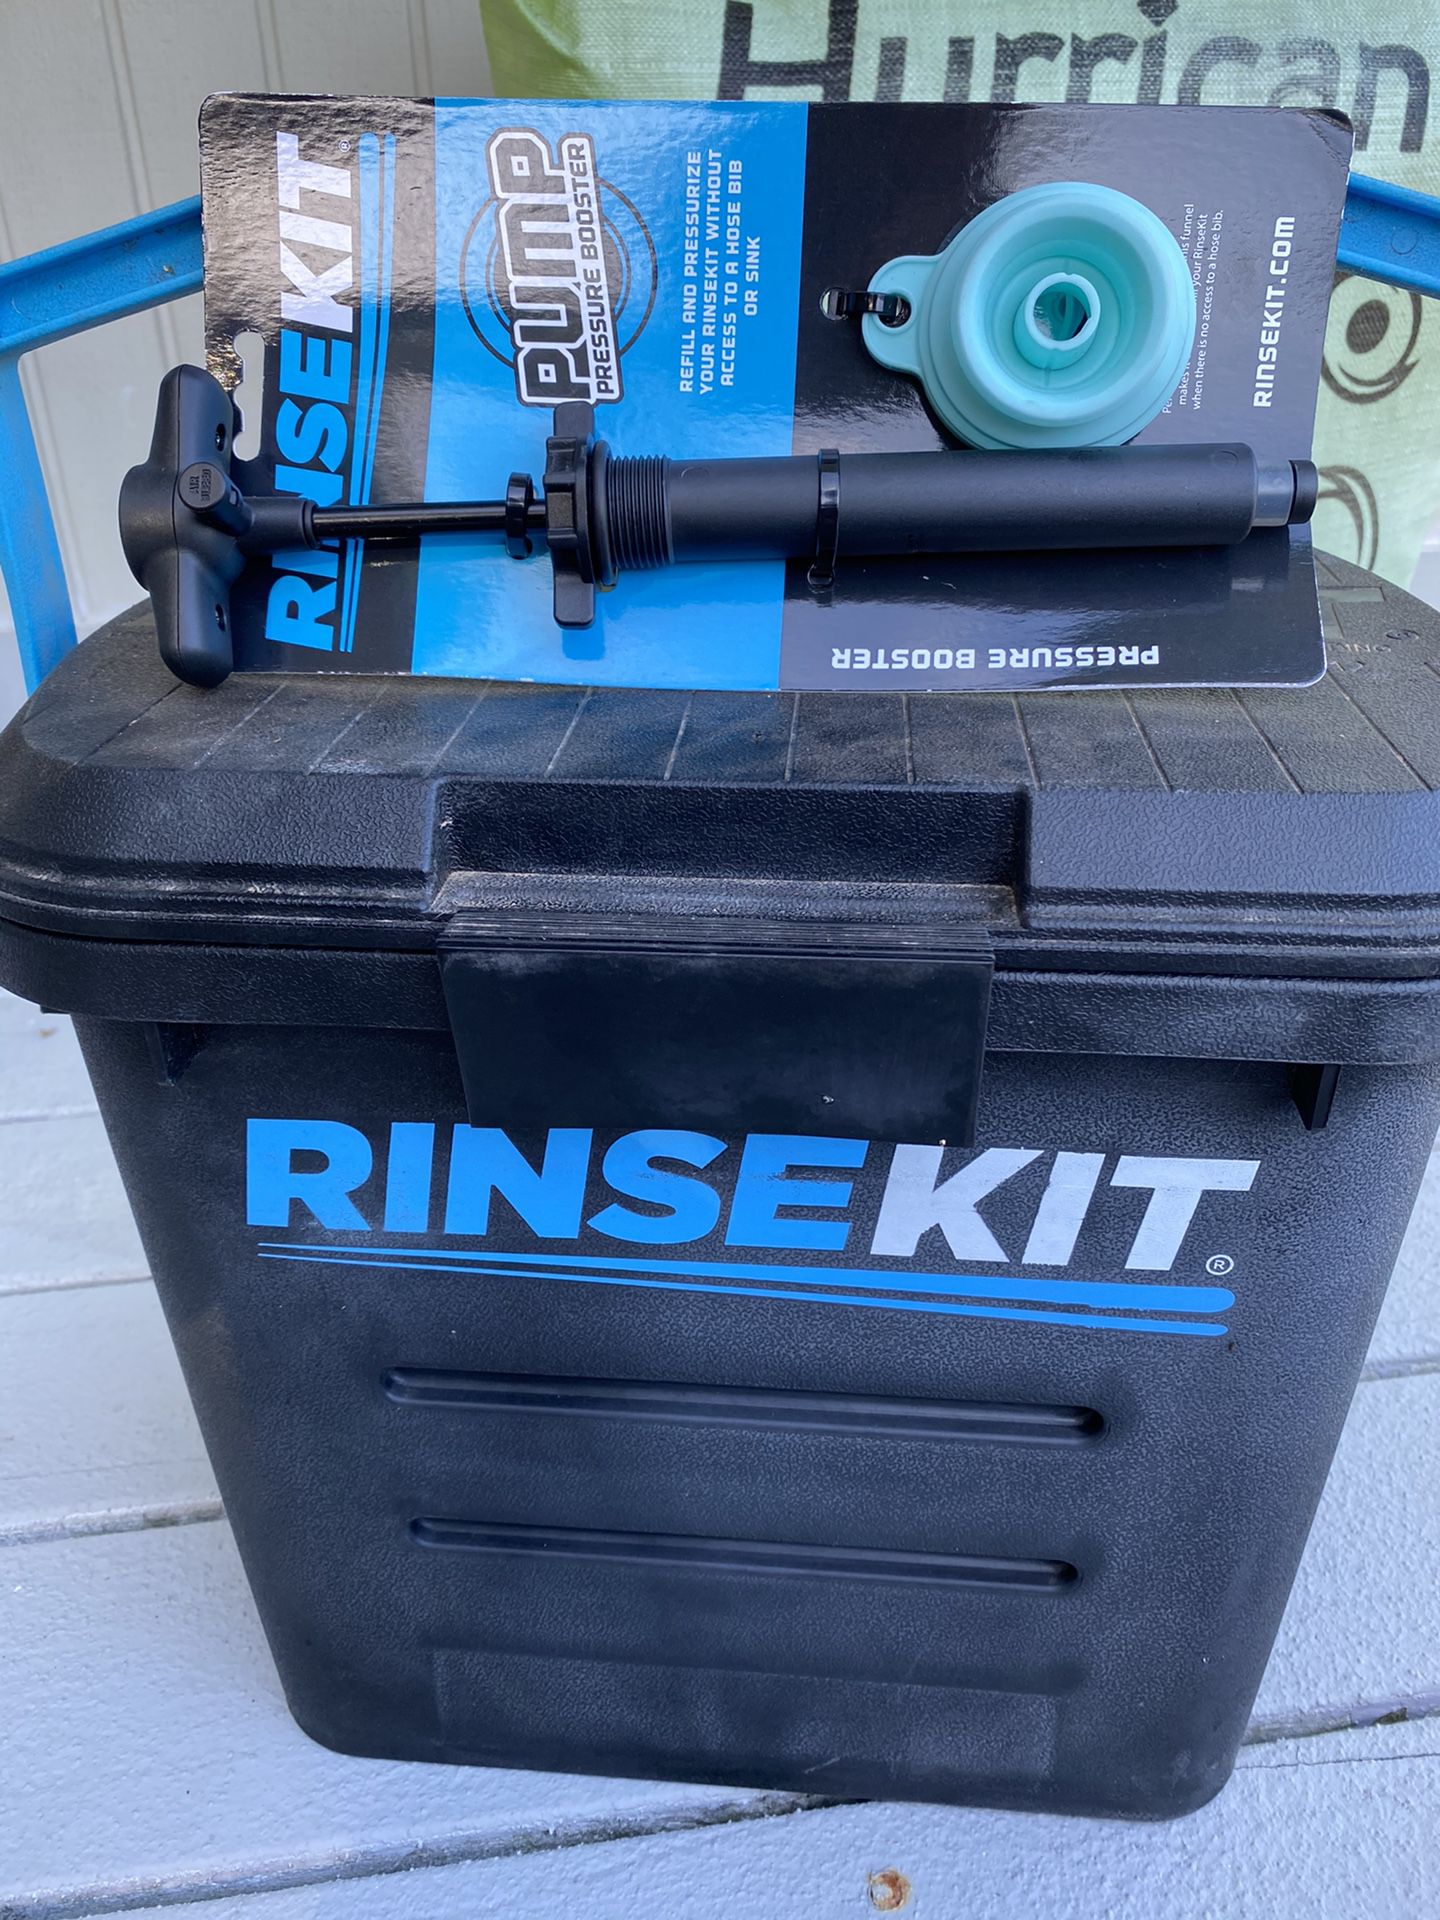 RinseKit with pump never used!